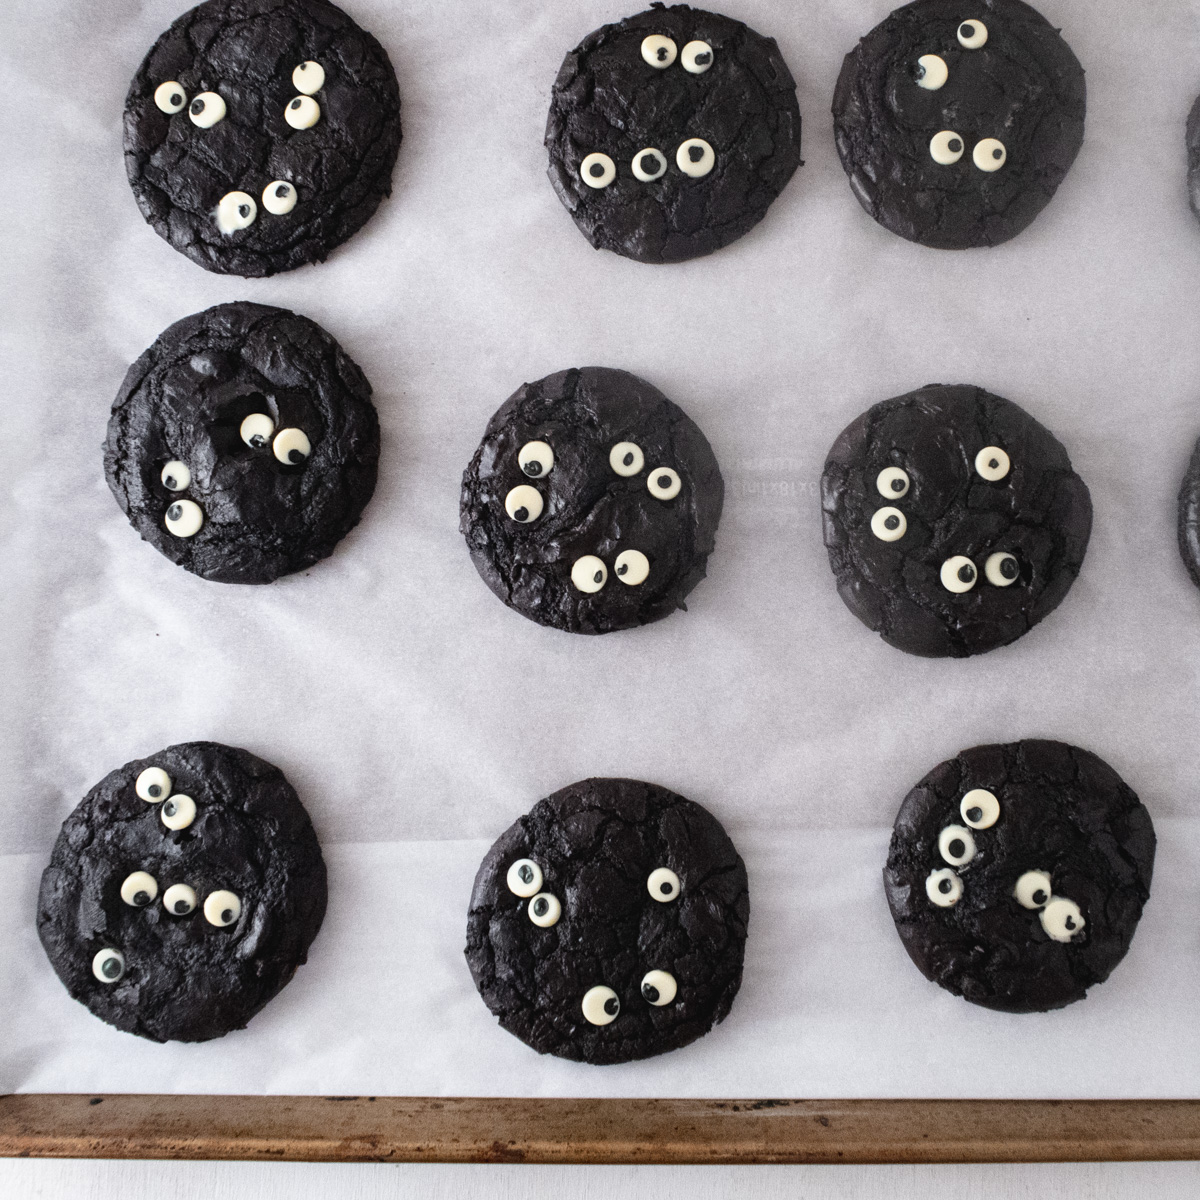 9 brownie cookies decorated with white chocolate eyes on a baking sheet lined with parchment paper.